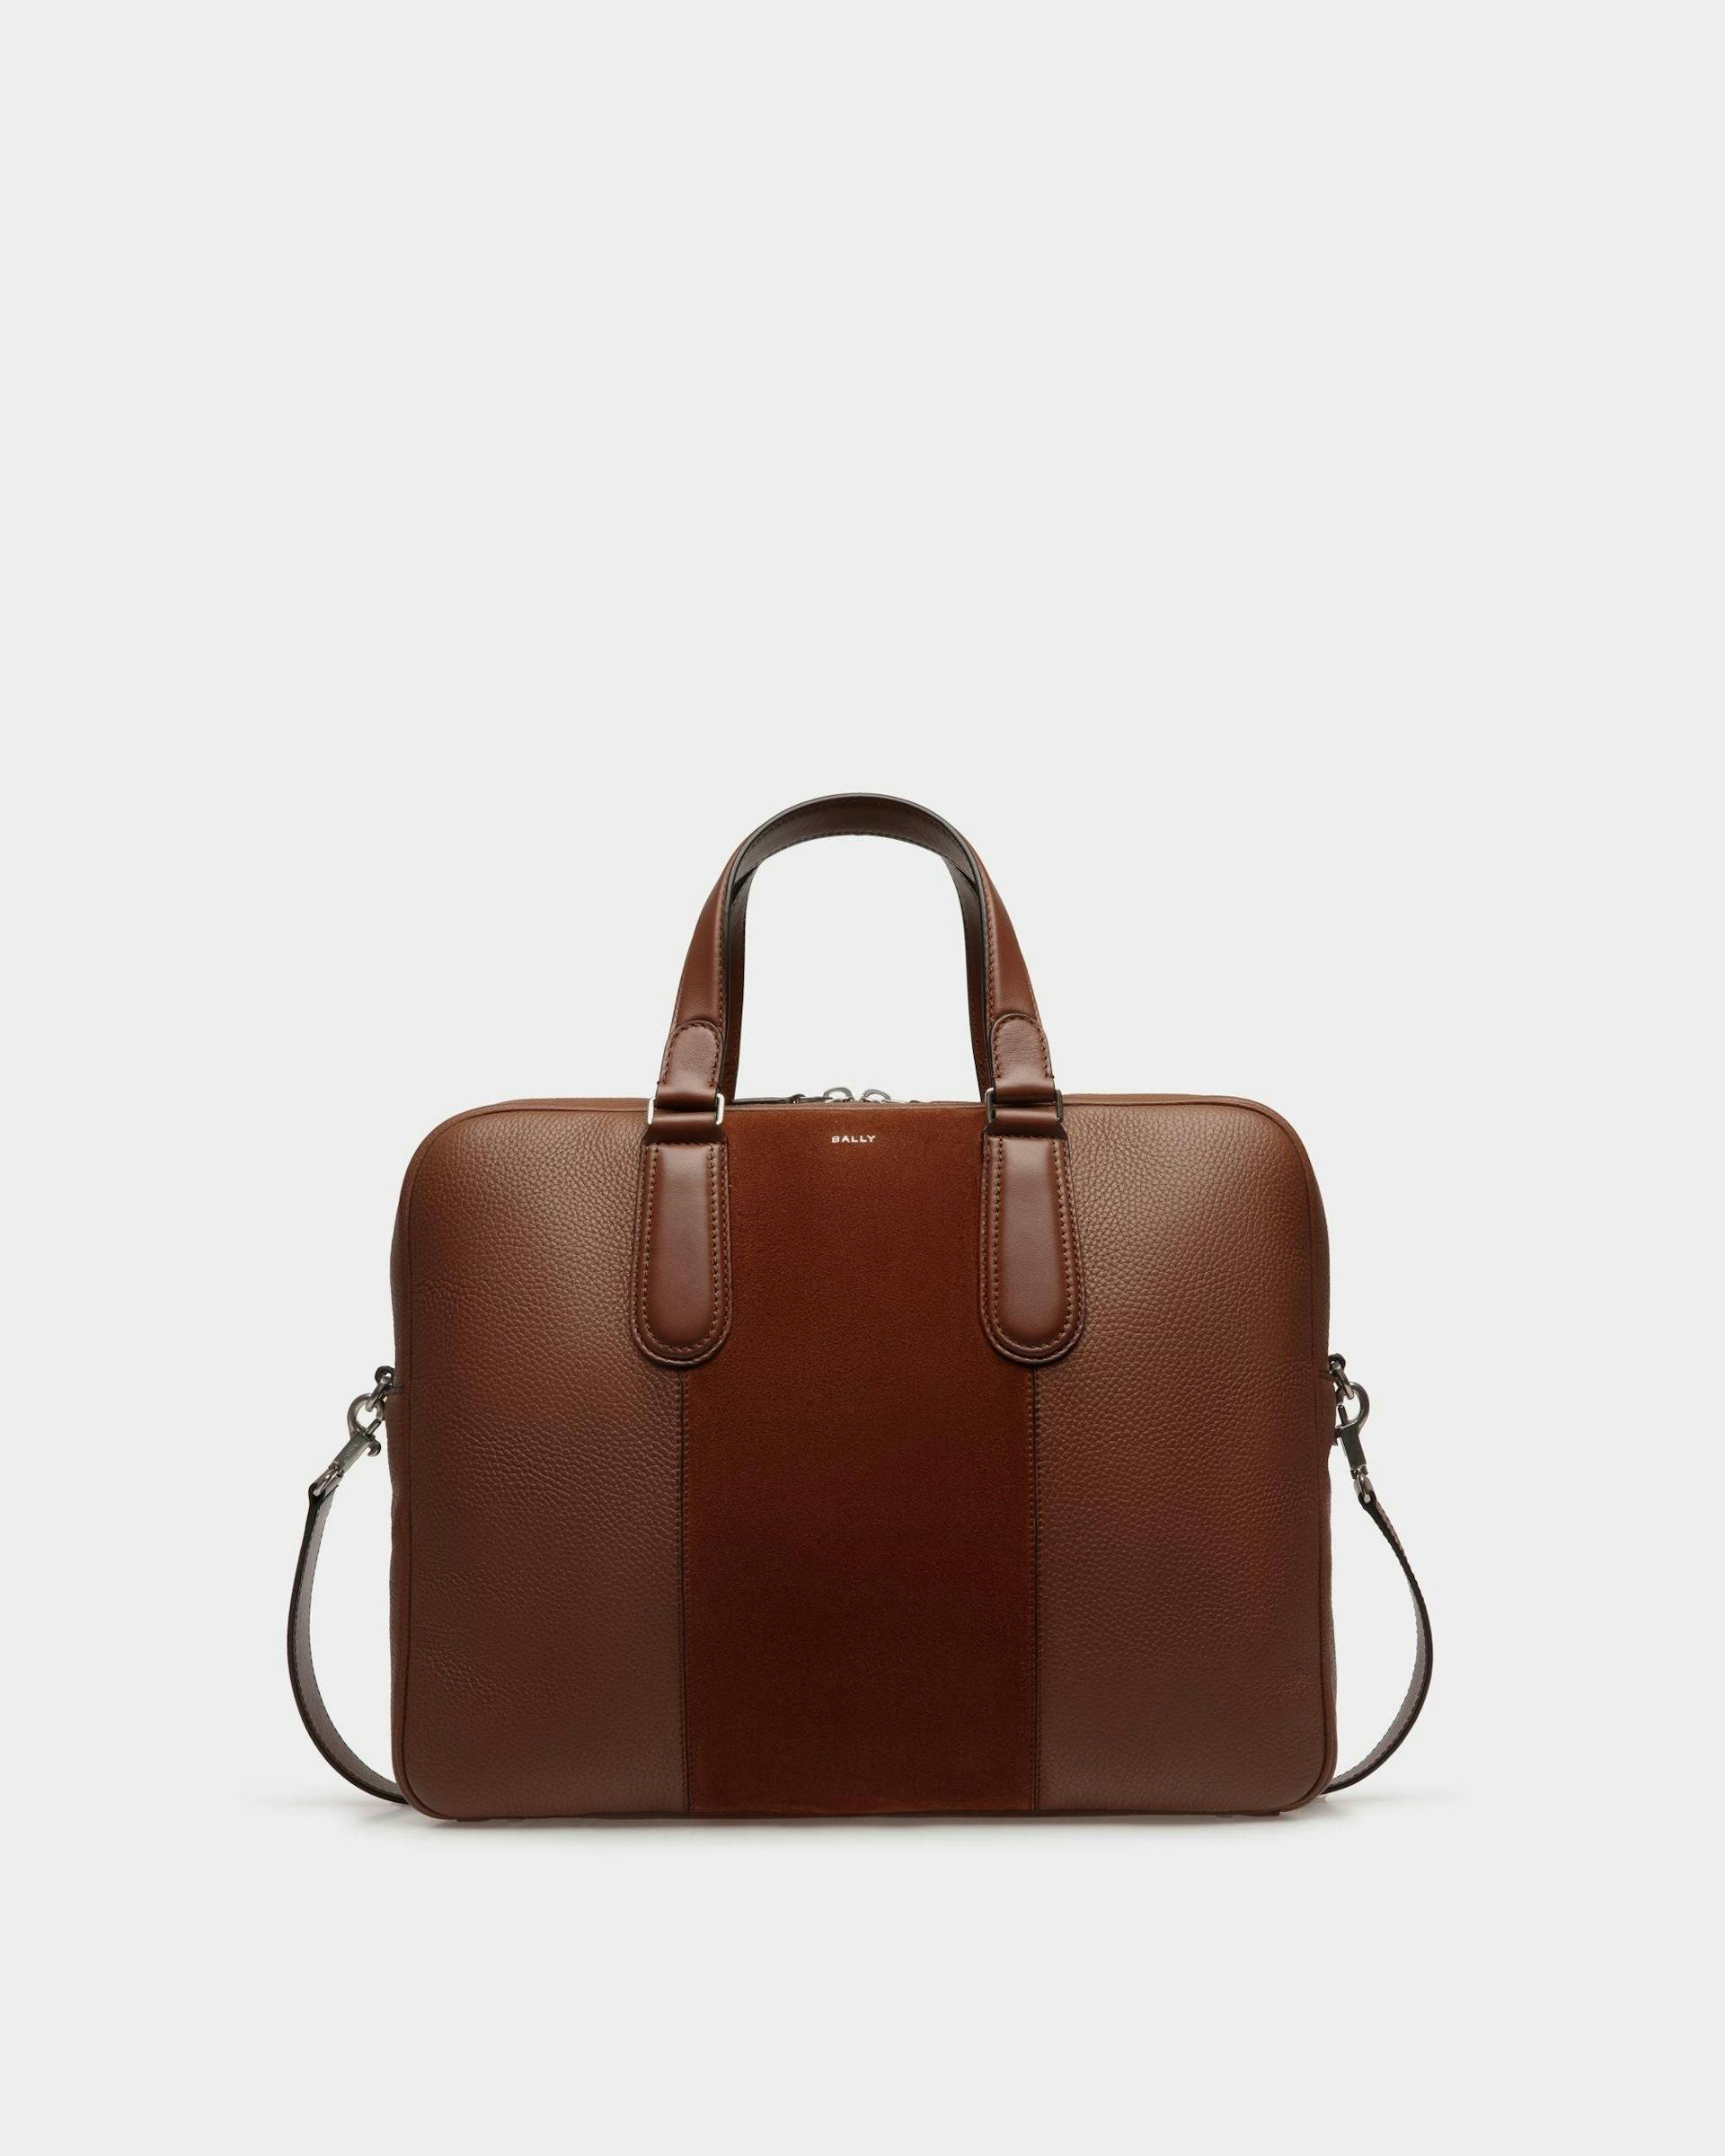 Men's Spin Briefcase in Brown Leather | Bally | Still Life Front